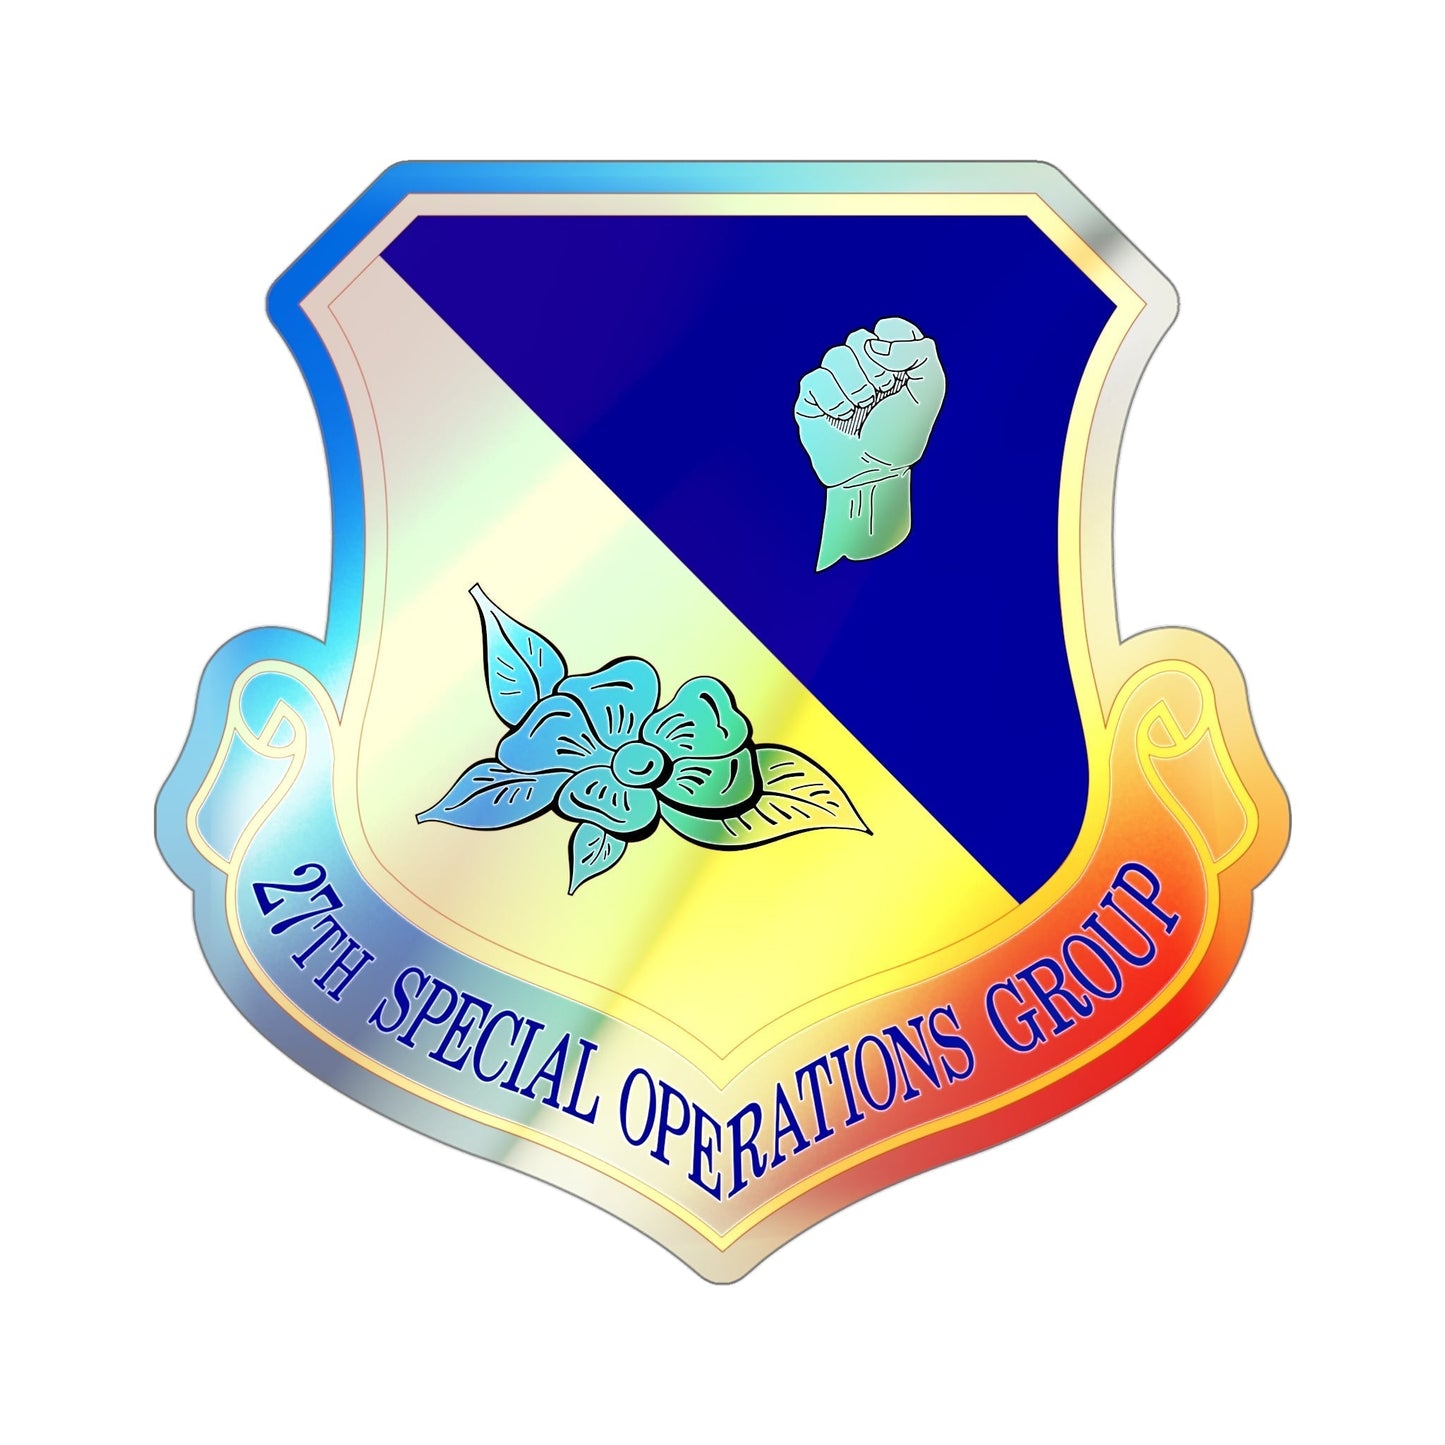 27 Special Operations Group AFSOC (U.S. Air Force) Holographic STICKER Die-Cut Vinyl Decal-4 Inch-The Sticker Space